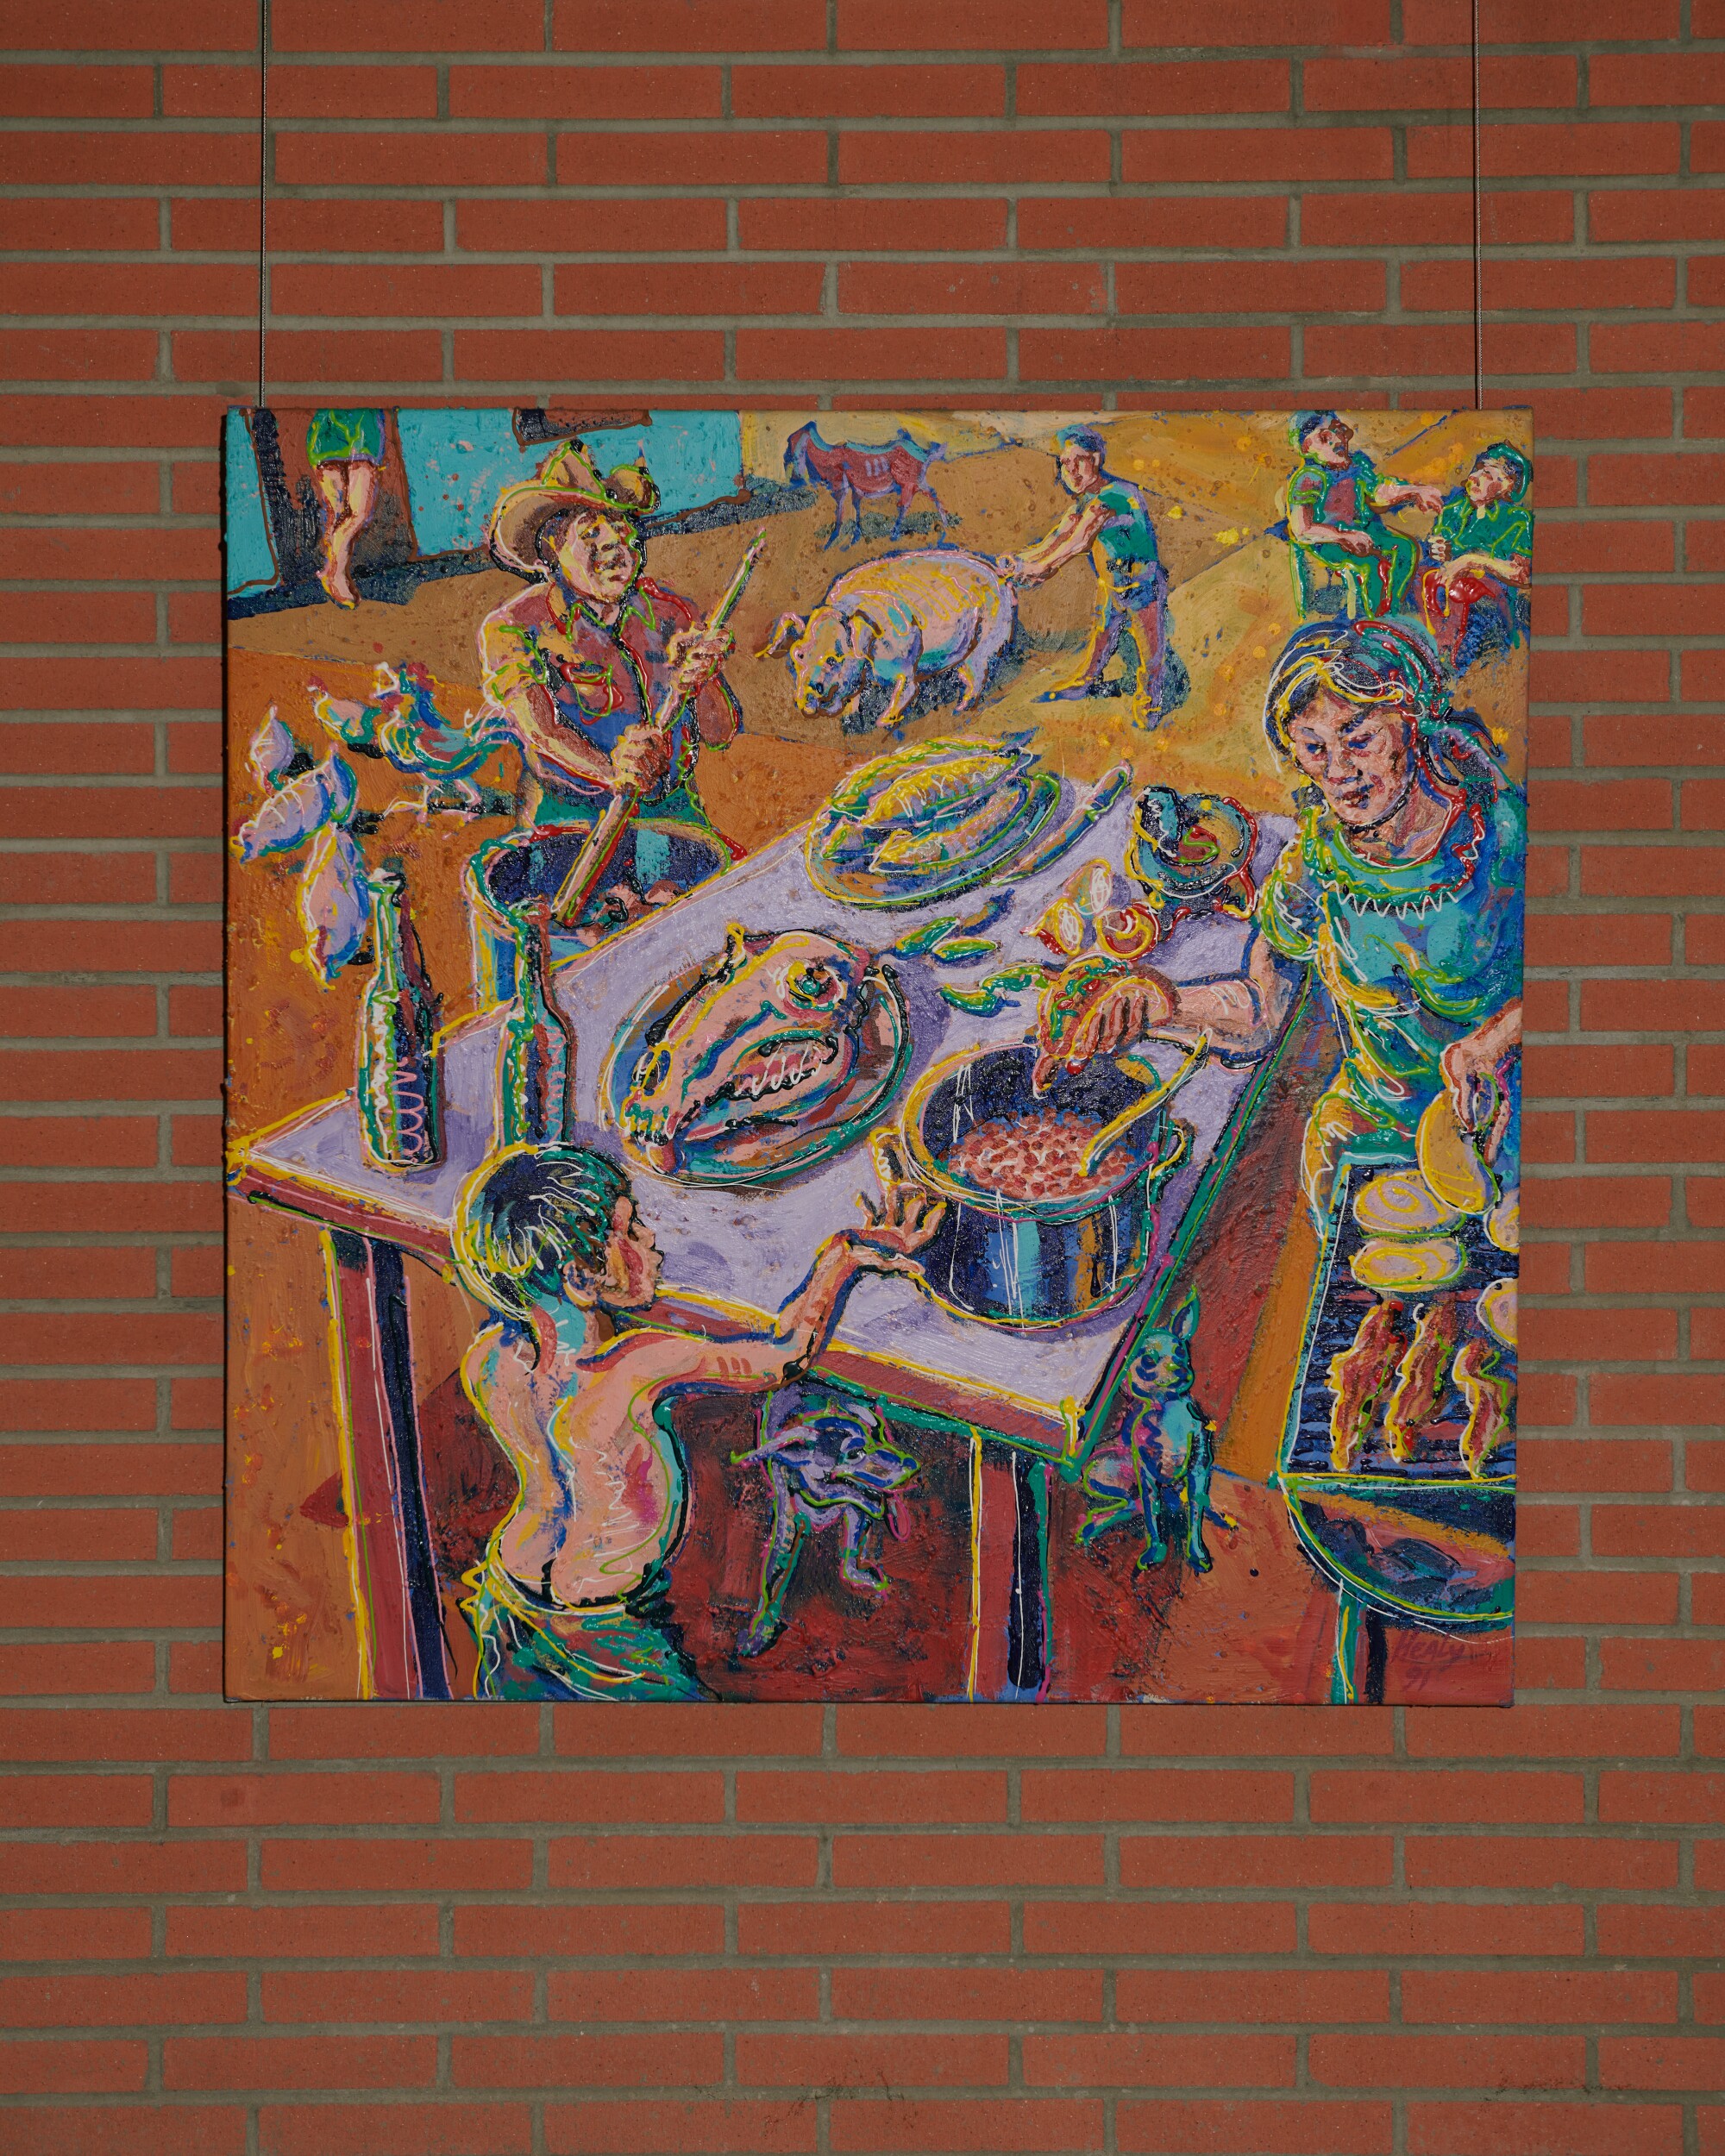 A colorful painting of a family preparing a meal outdoors hangs on a brick wall.